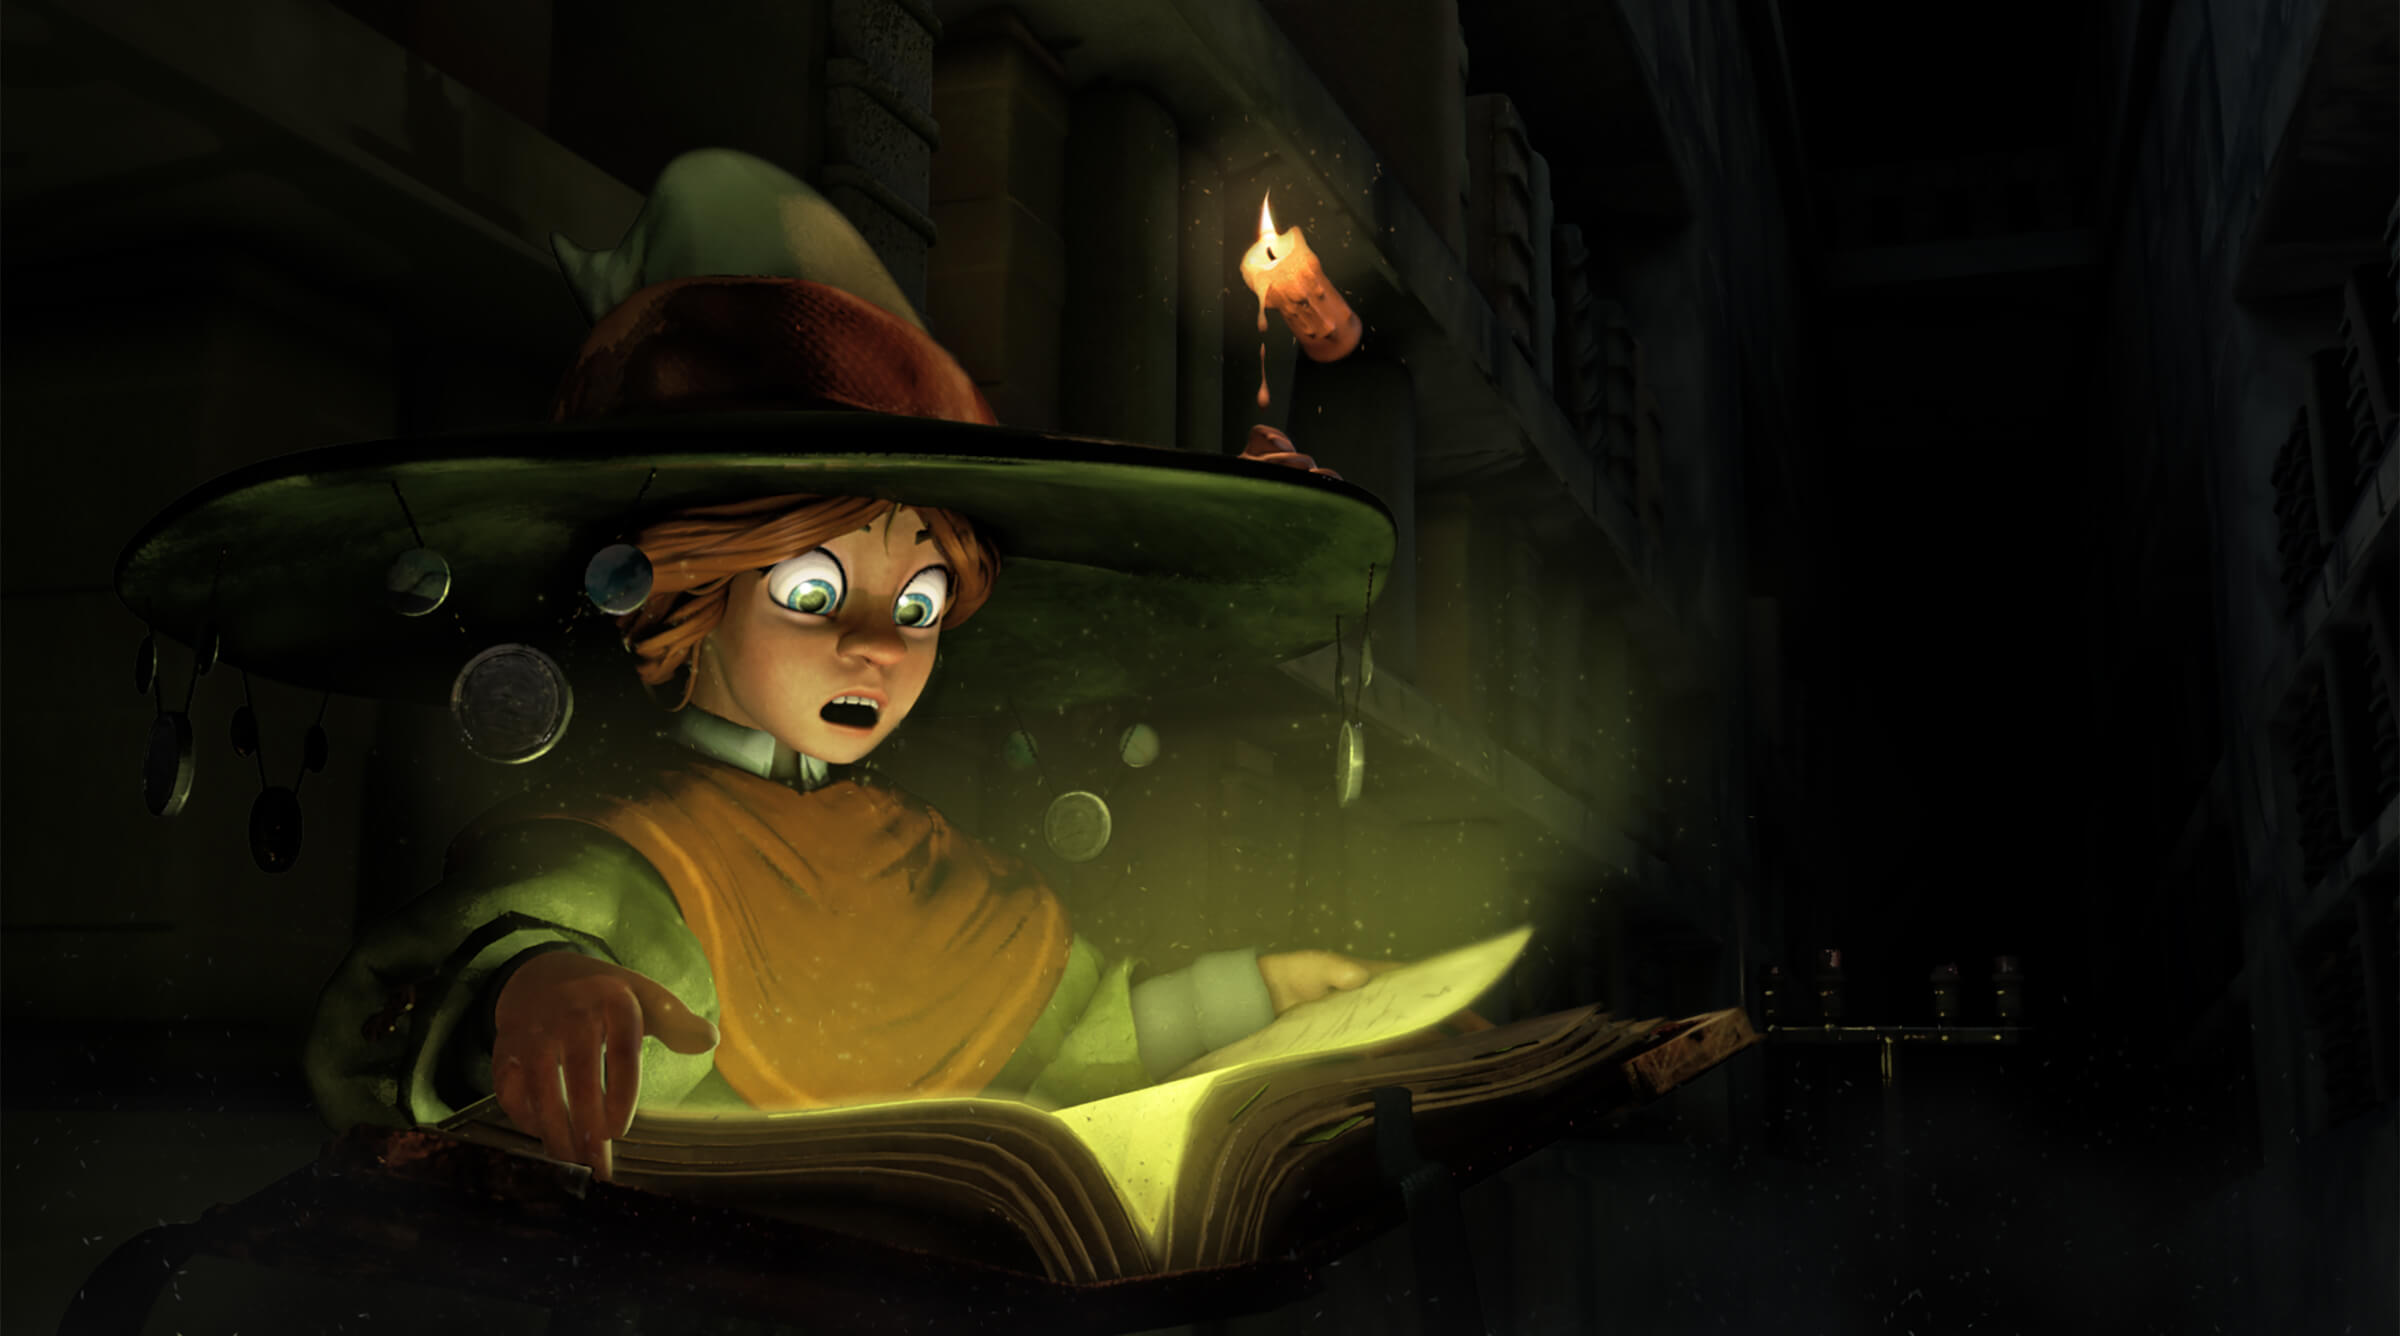 computer-generated 3D model of a character with huge green eyes reacting with shock at the book in front of them